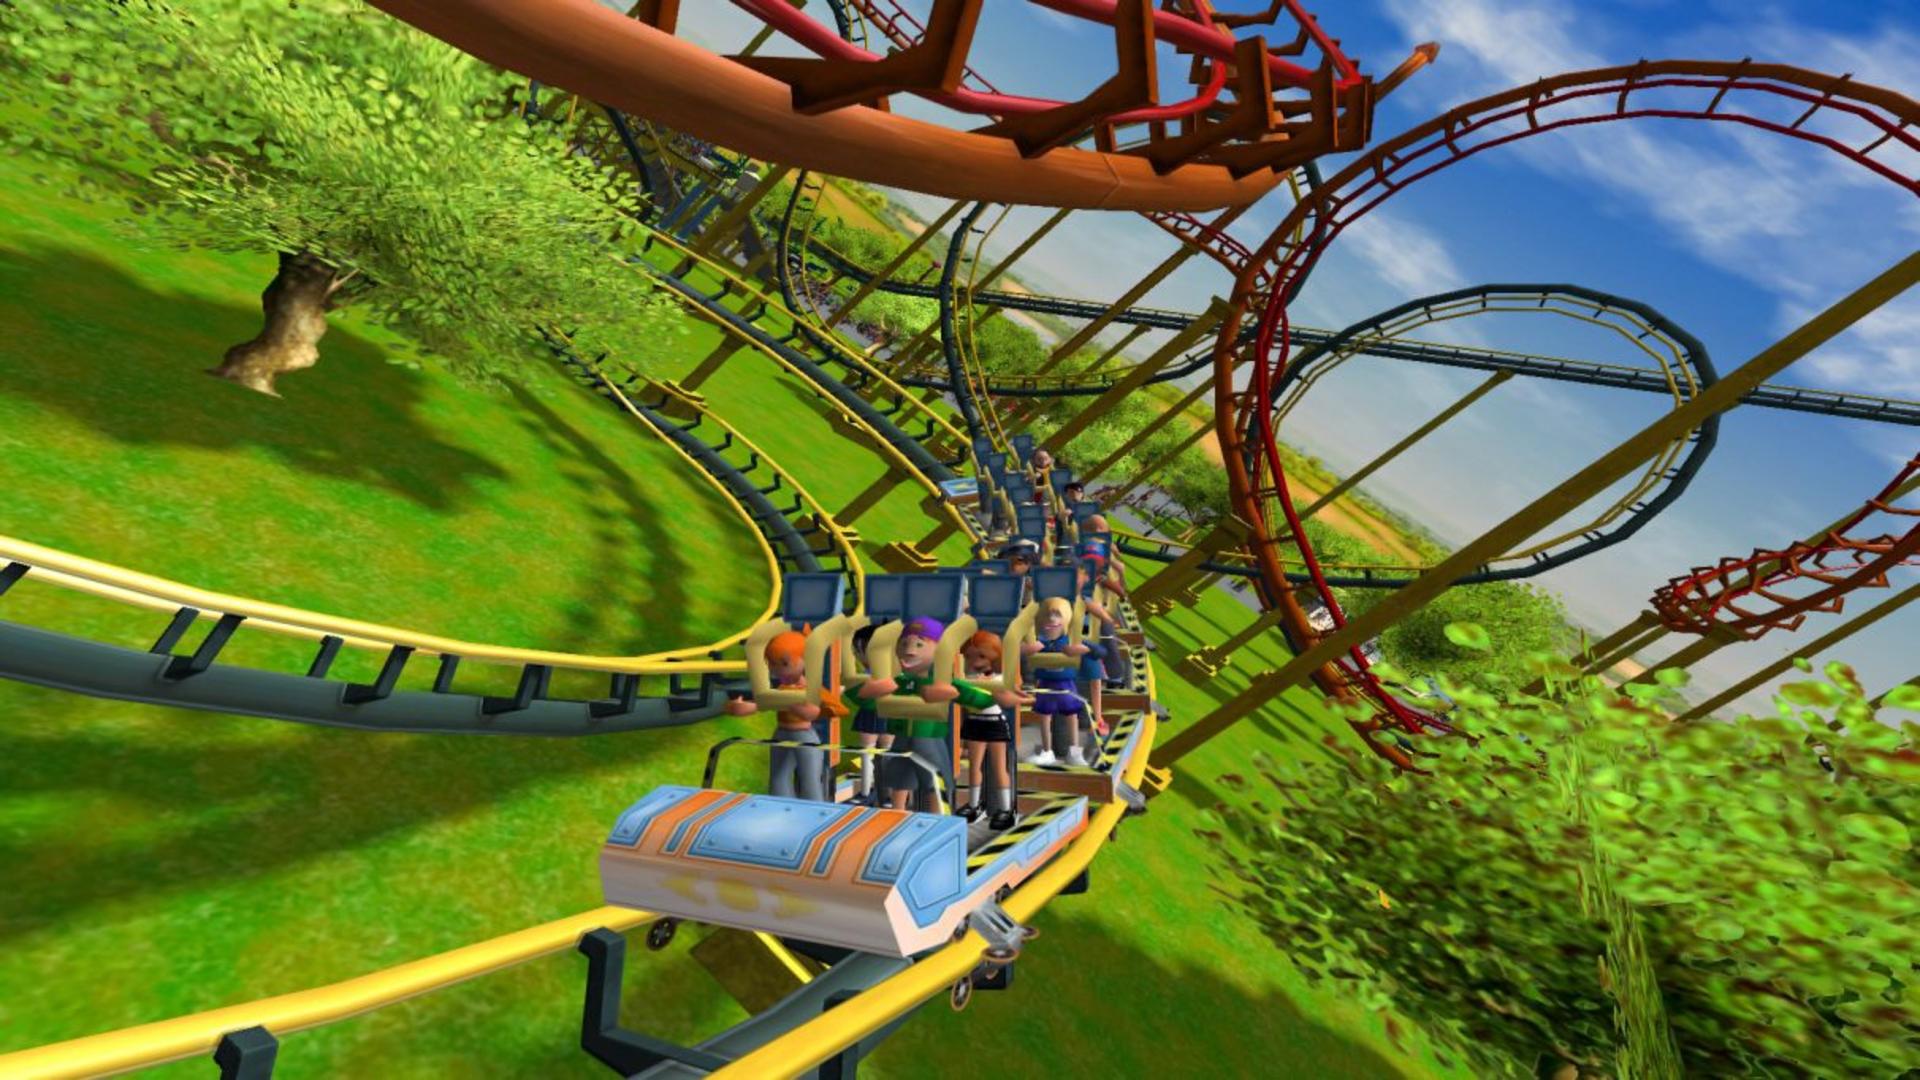 rollercoaster tycoon 3 platinum vs complete edition